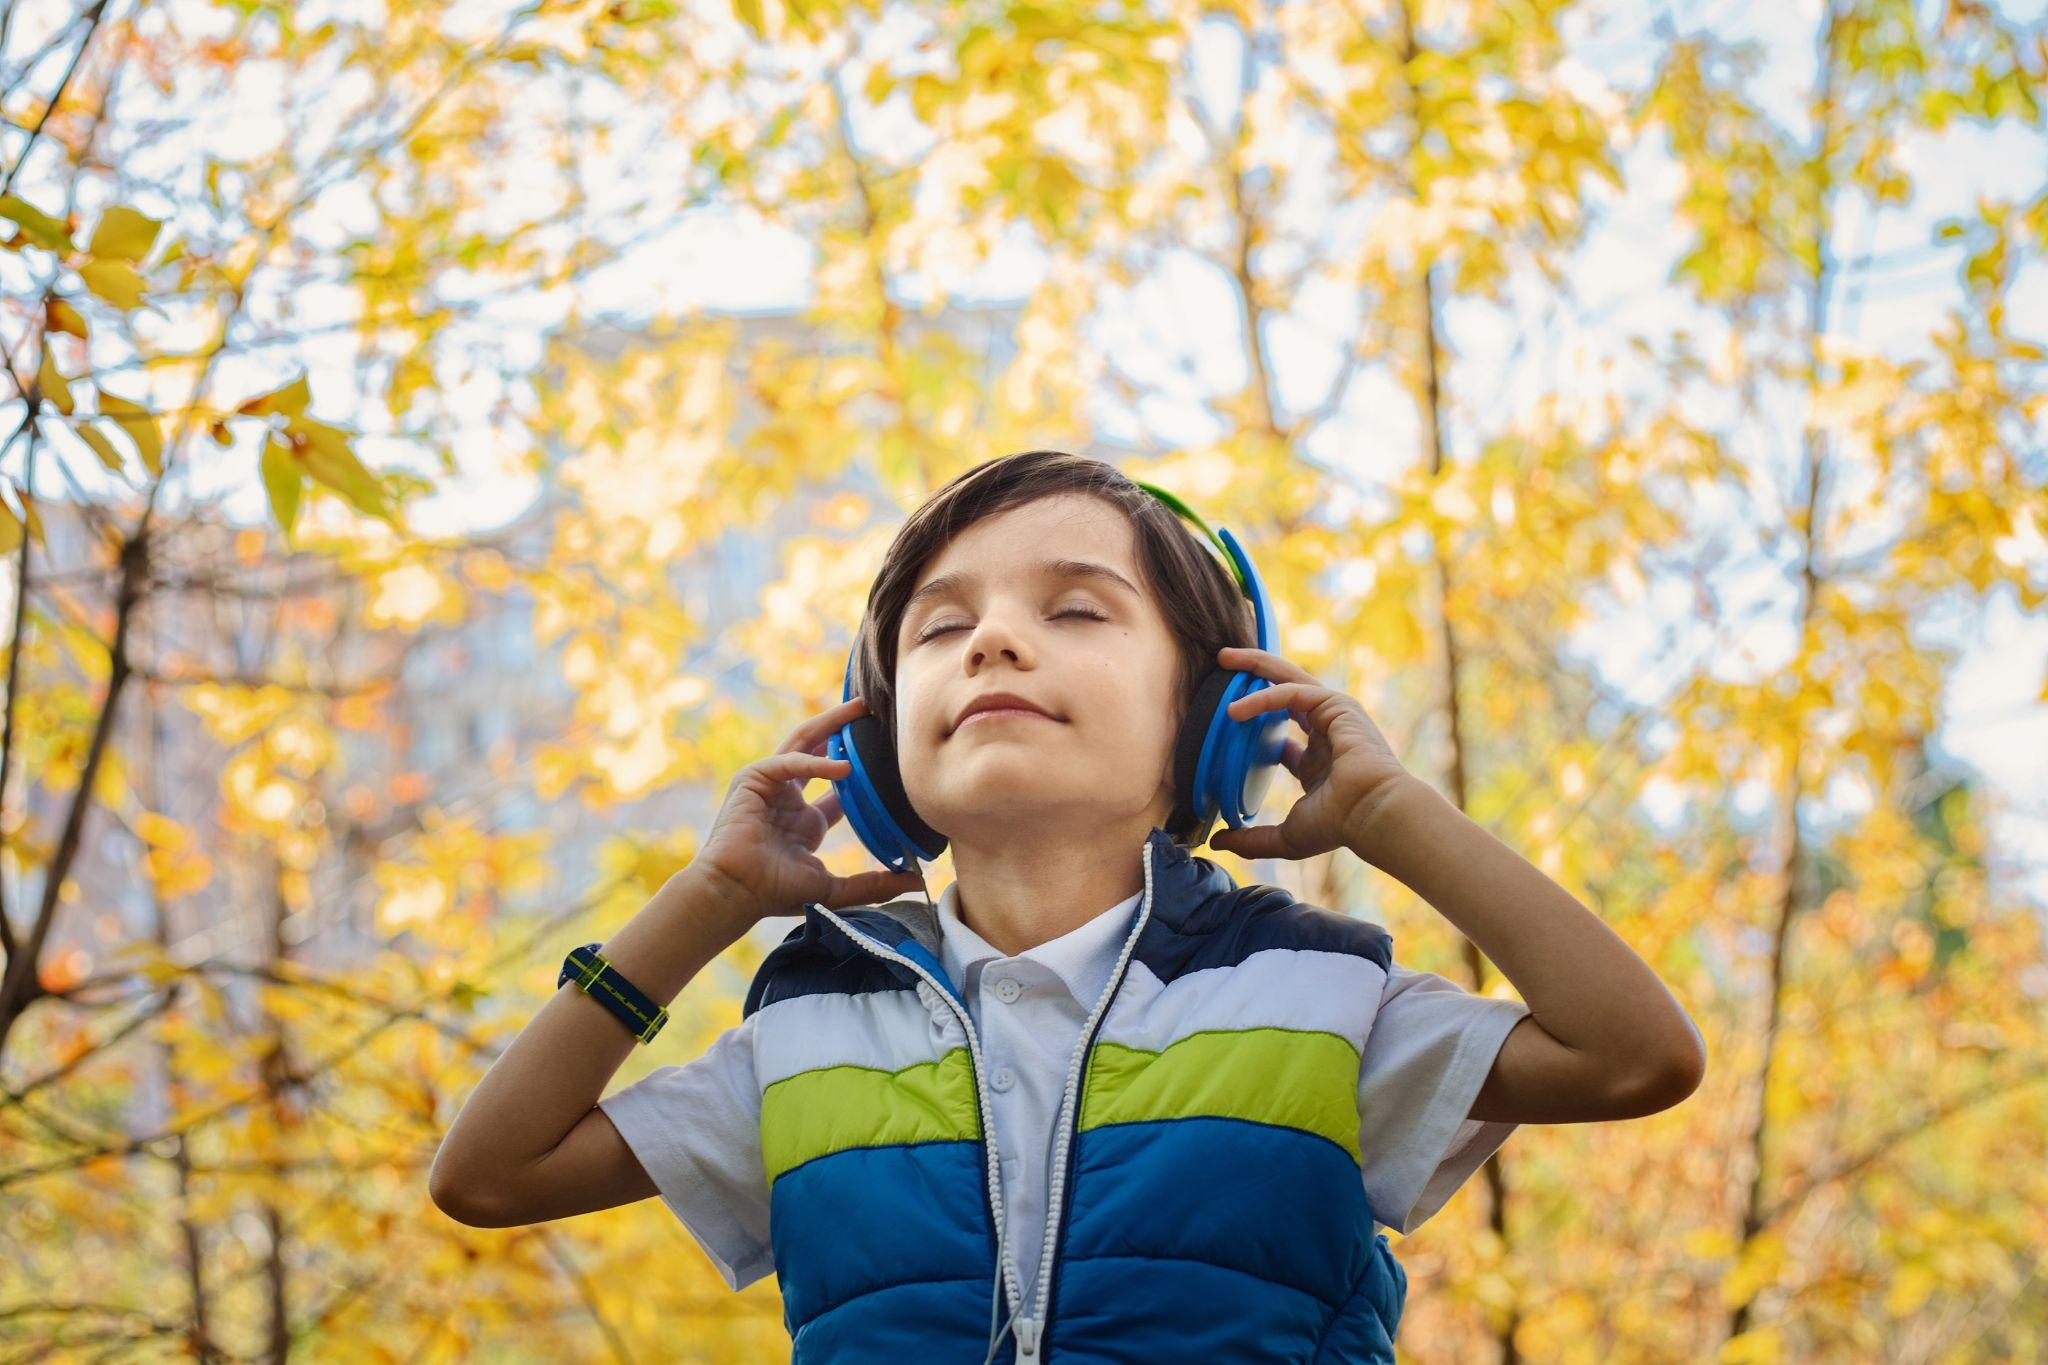 Do you still remember any rhyme taught in school? Even if not the entire poem, you may still be able to recall certain lines or musical tunes. Music has a lot of impact on children’s mental and cognitive abilities. Have you ever noticed a child who doesn’t even know how to speak – dance, and […]